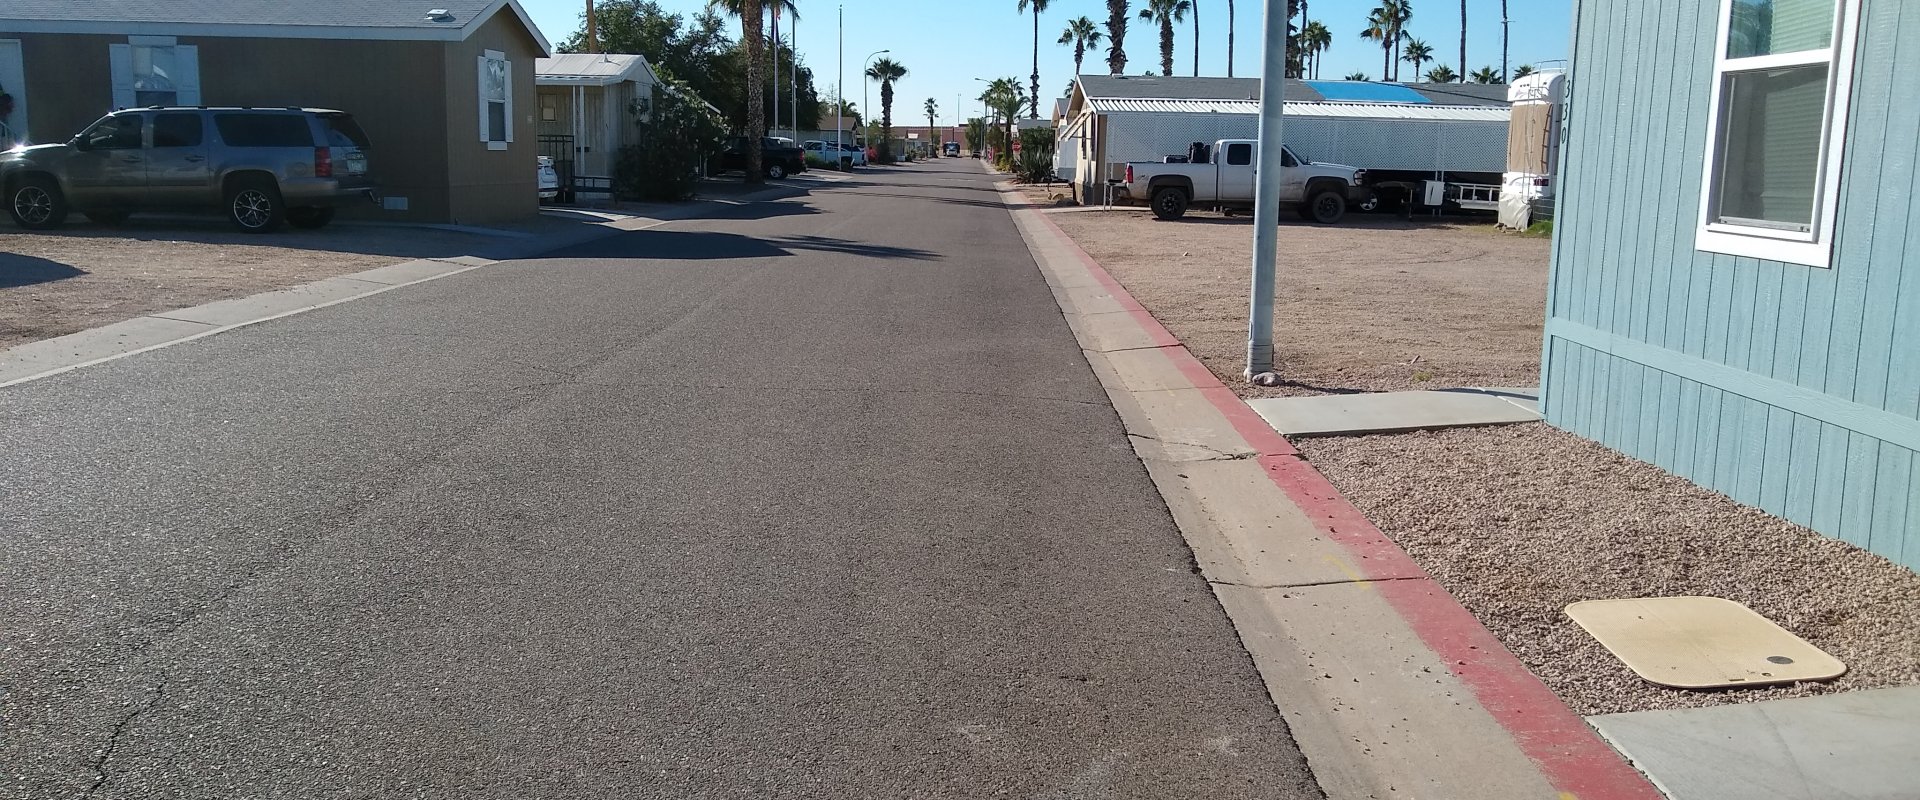 Sell My Mobile Home Phoenix